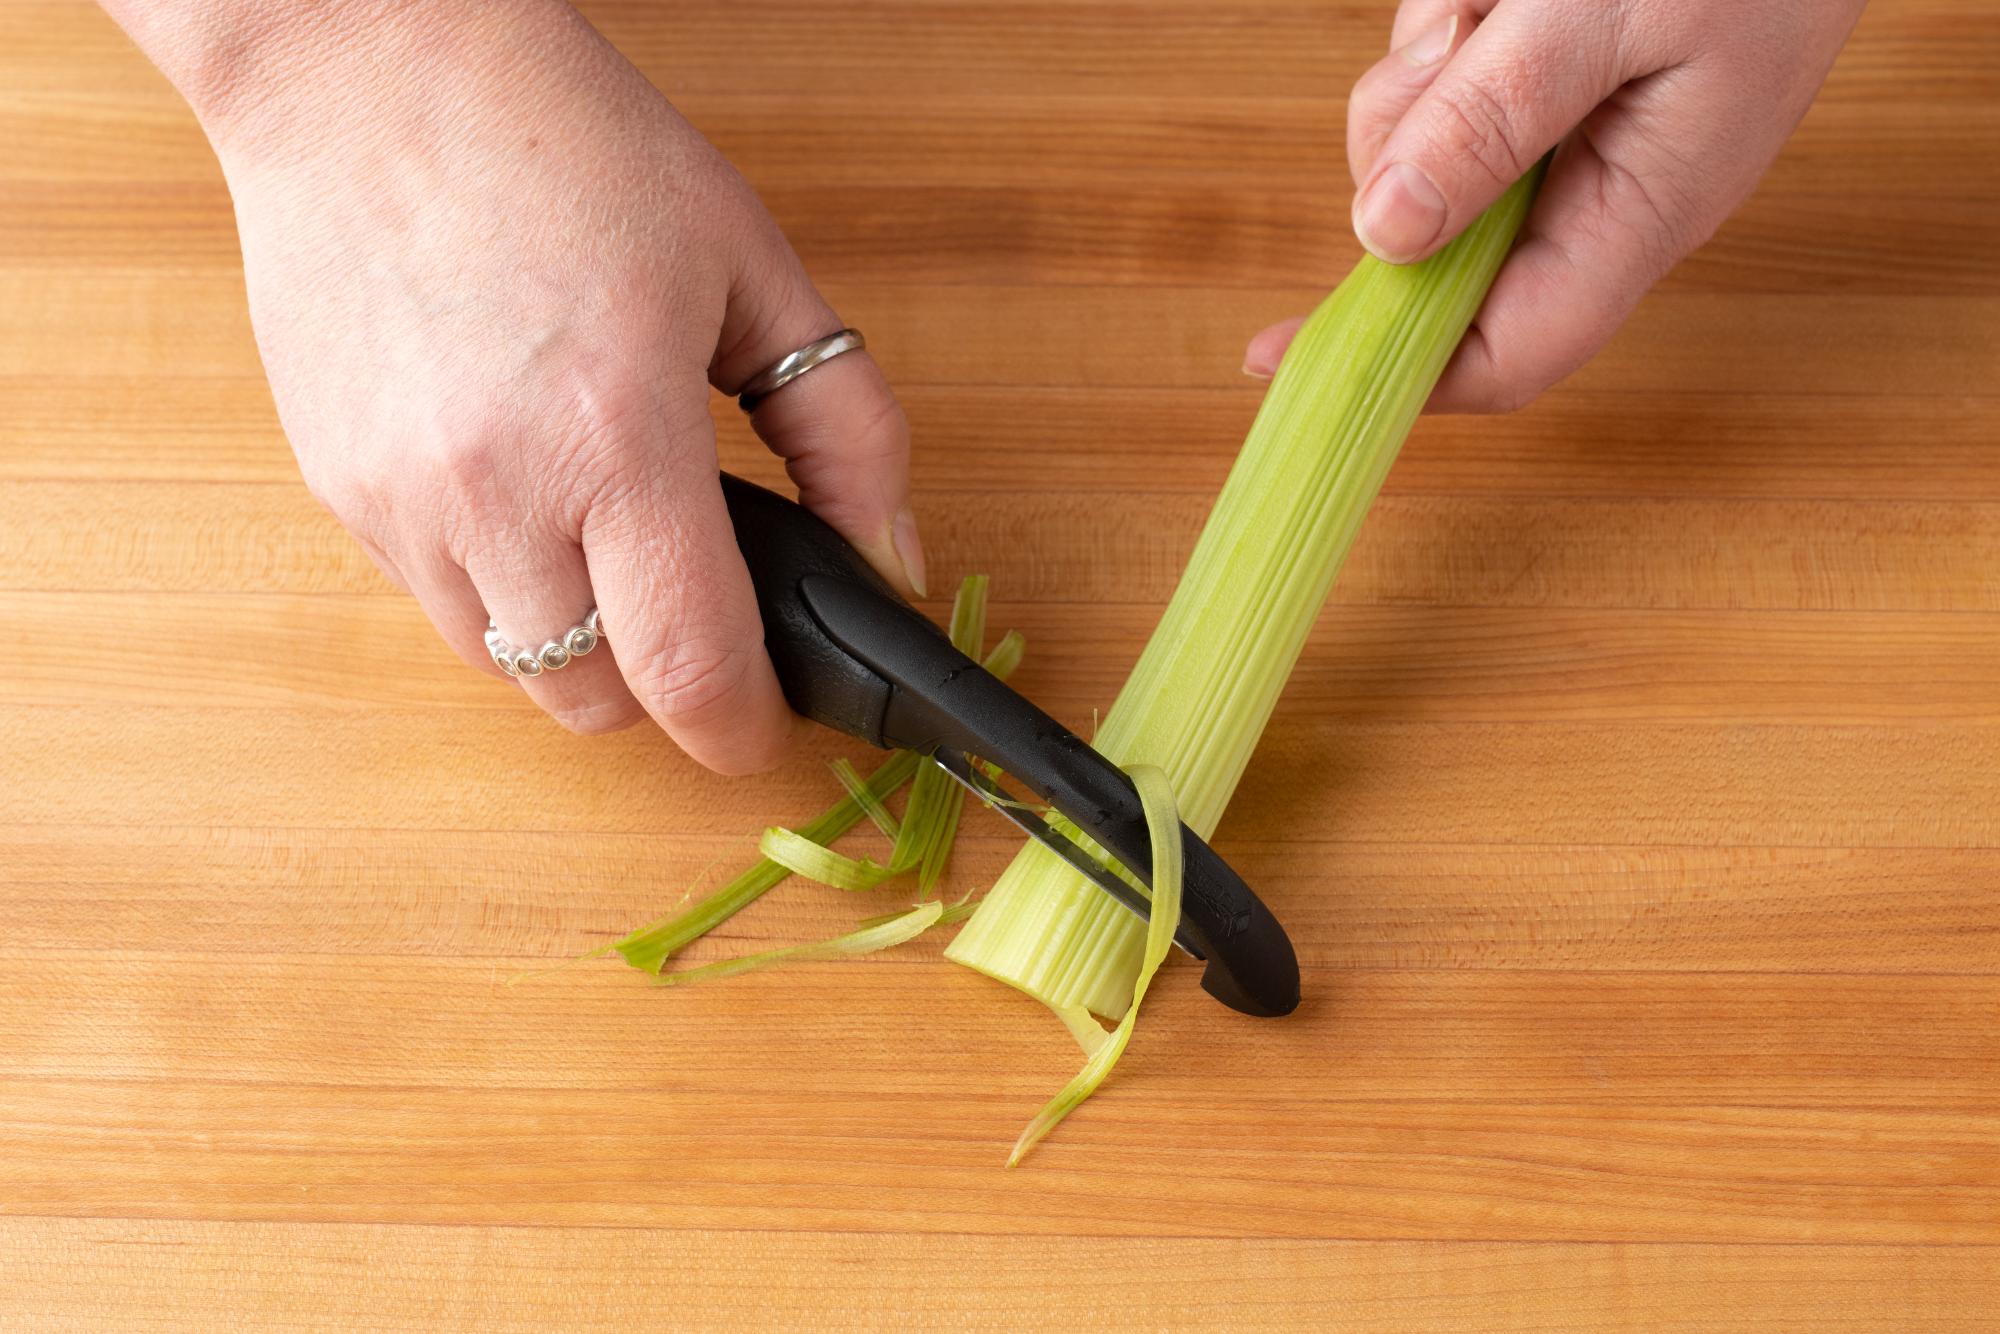 Using a Peeler to remove the fibrous strings on the celery.